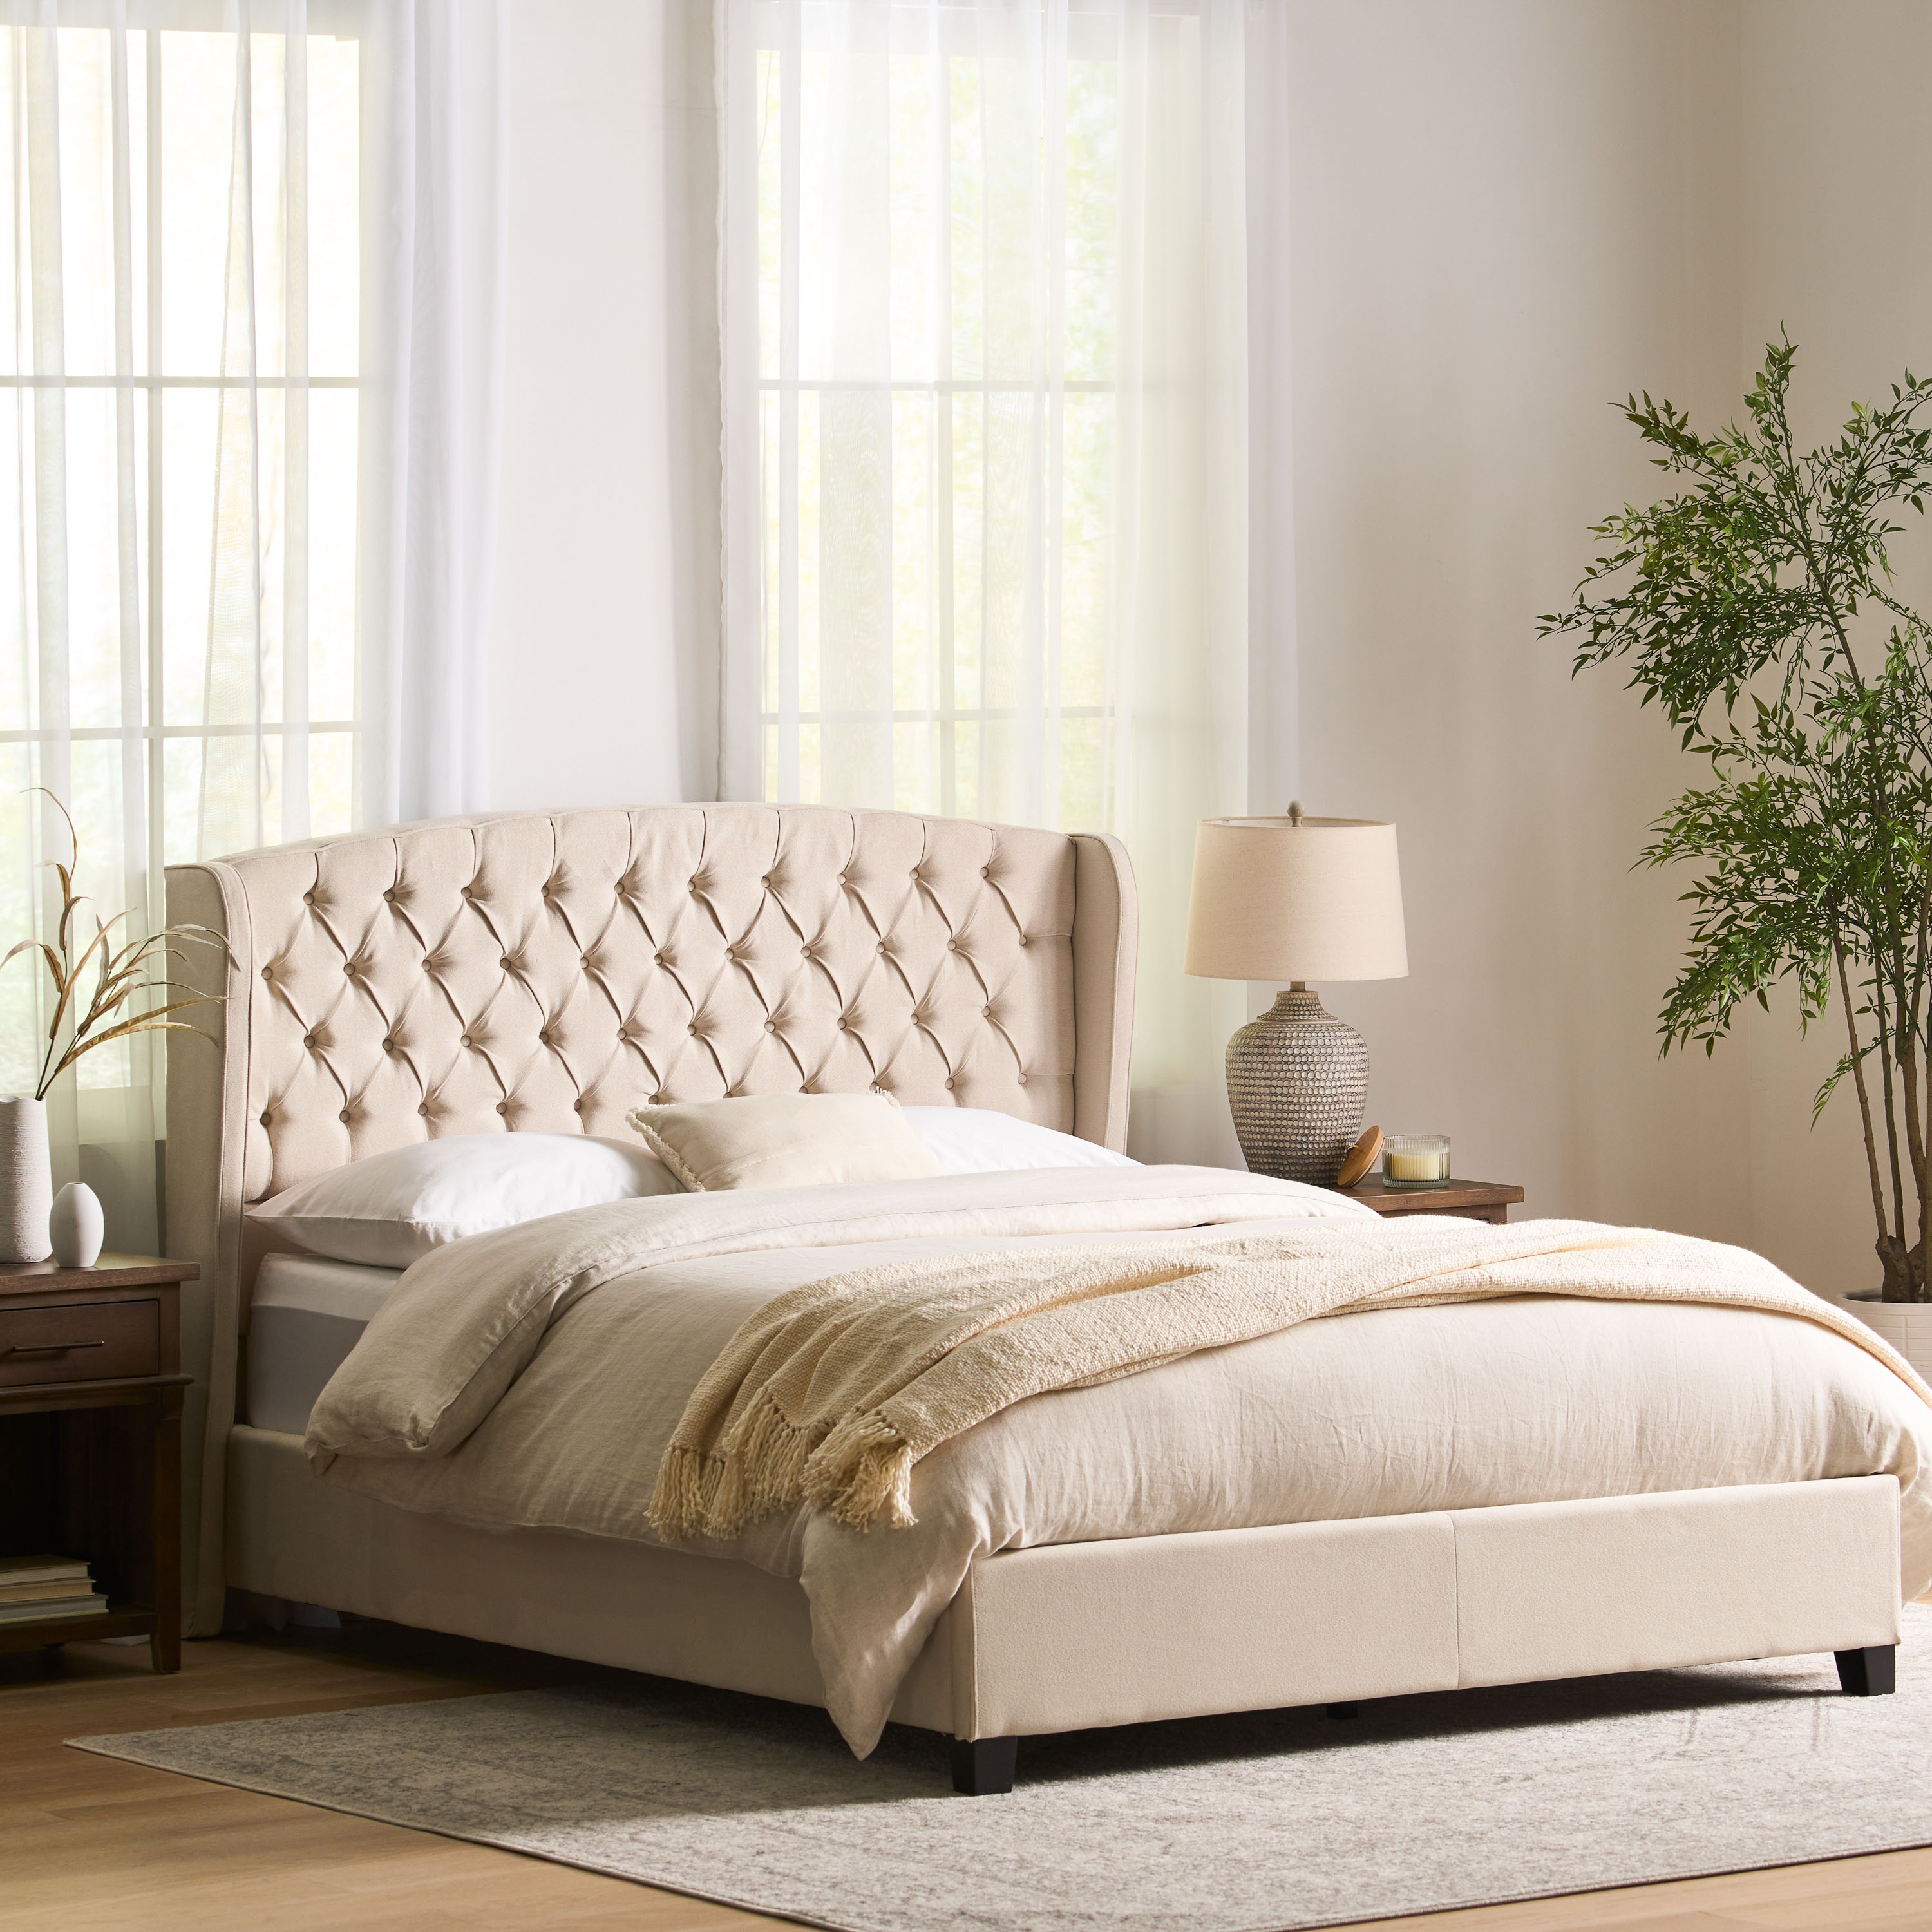 Twilight Fully Upholstered Fabric Queen Bed Set - Ivory